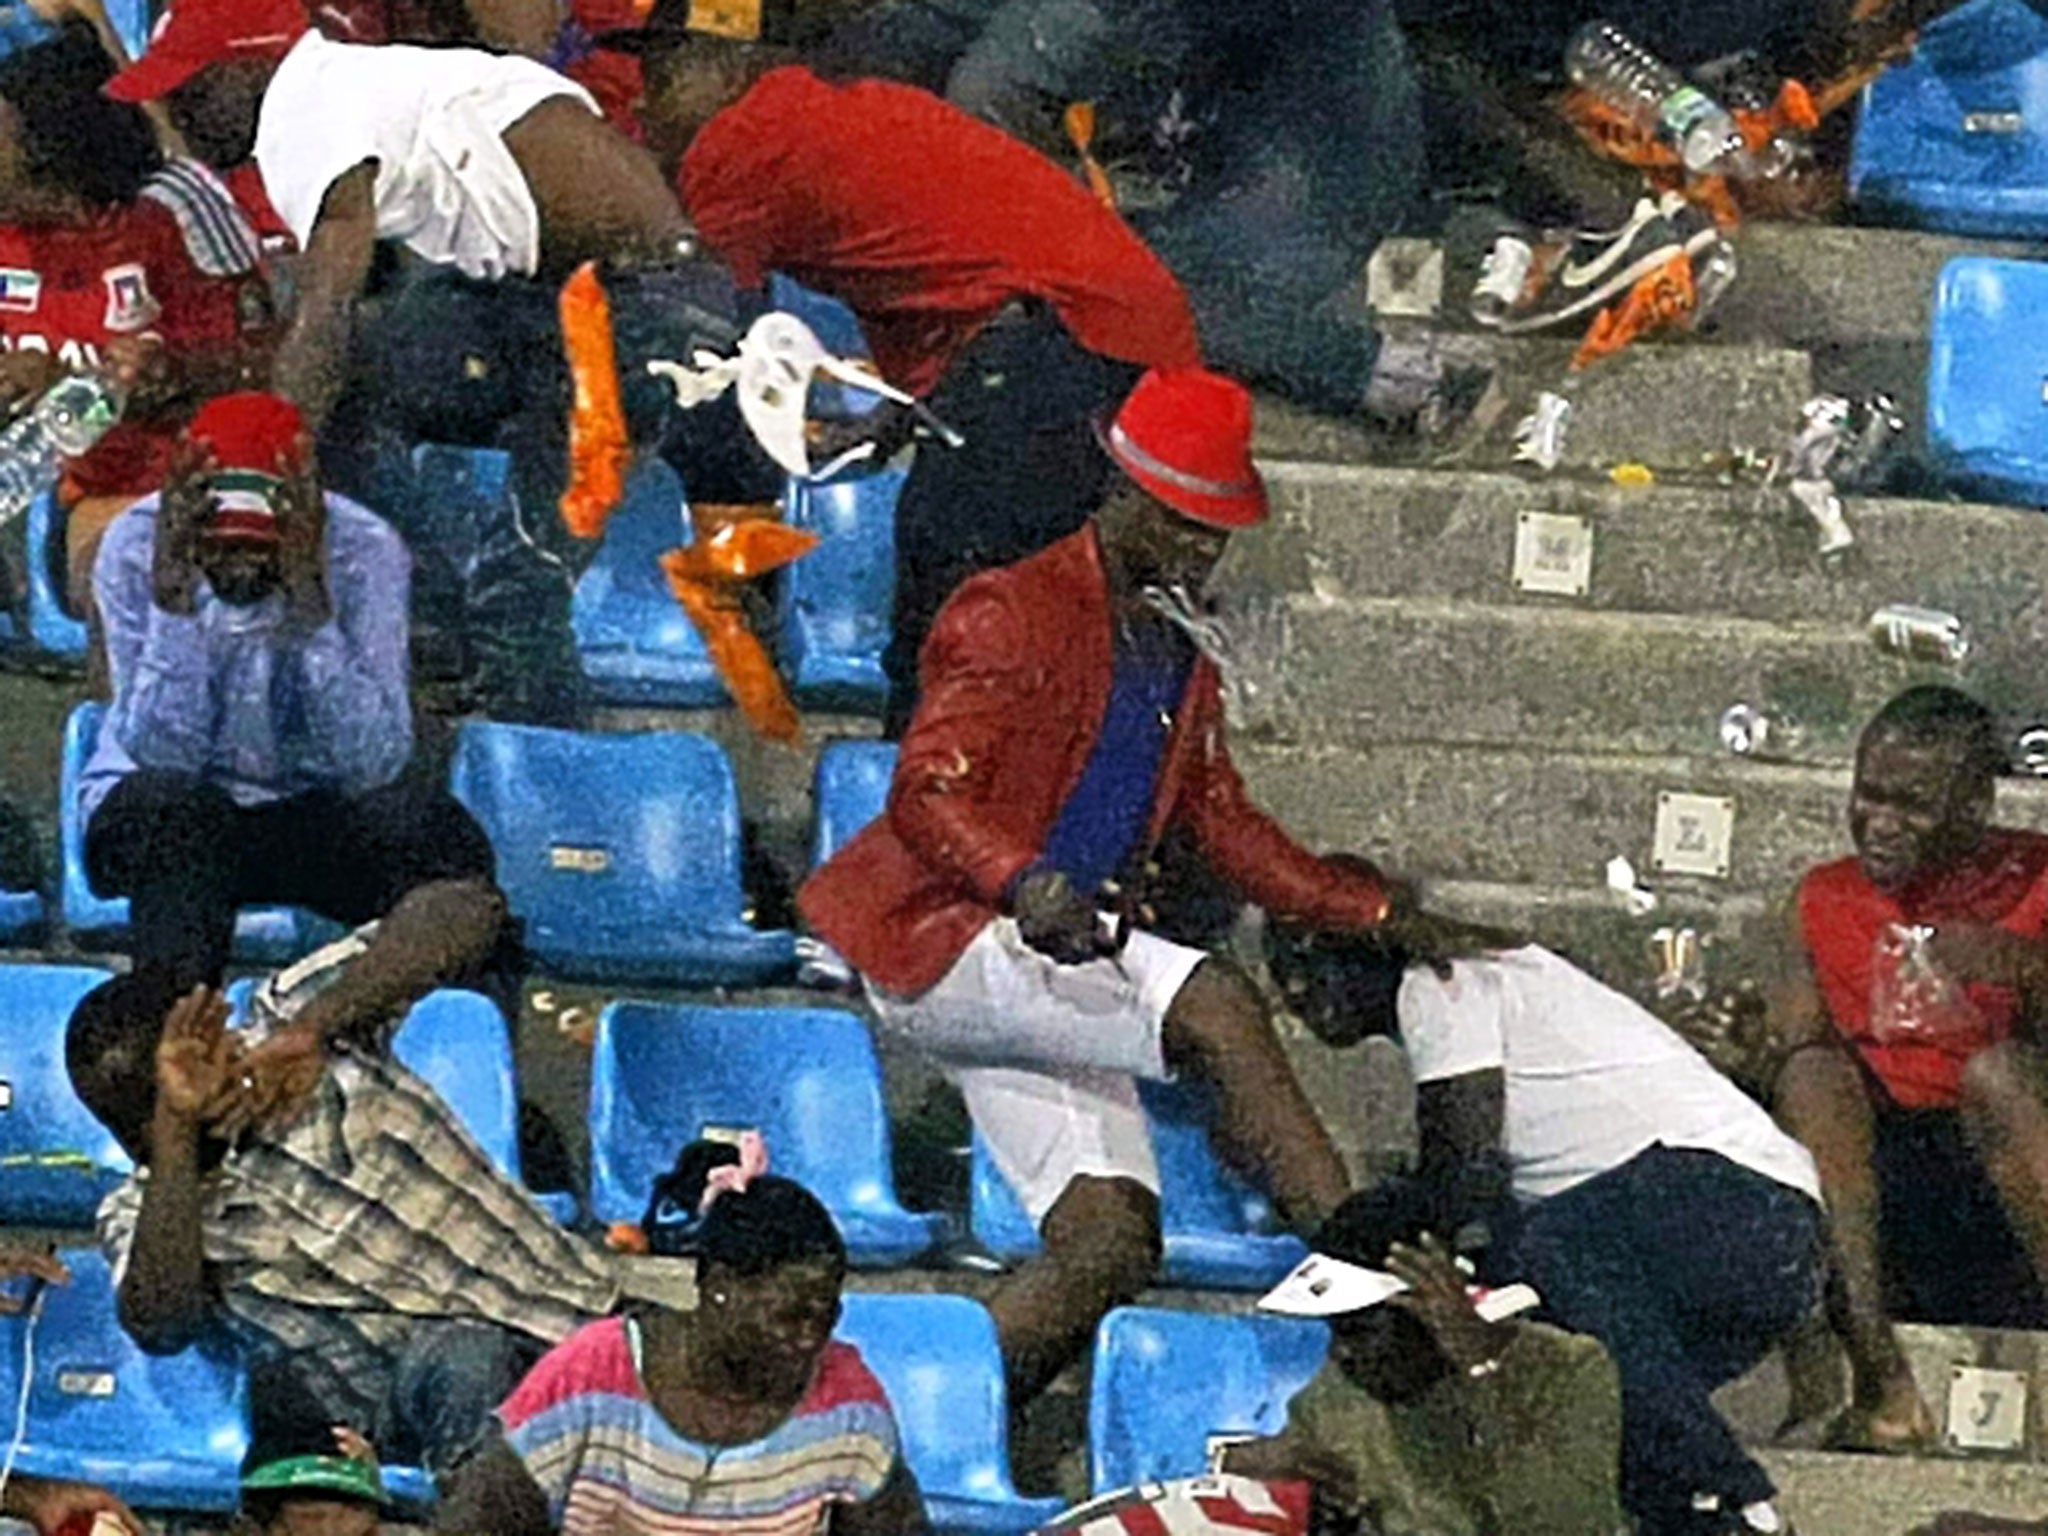 Trouble in the crowd during Ghana’s riot-hit semi-final victory over Equatorial Guinea at the African Cup of Nations